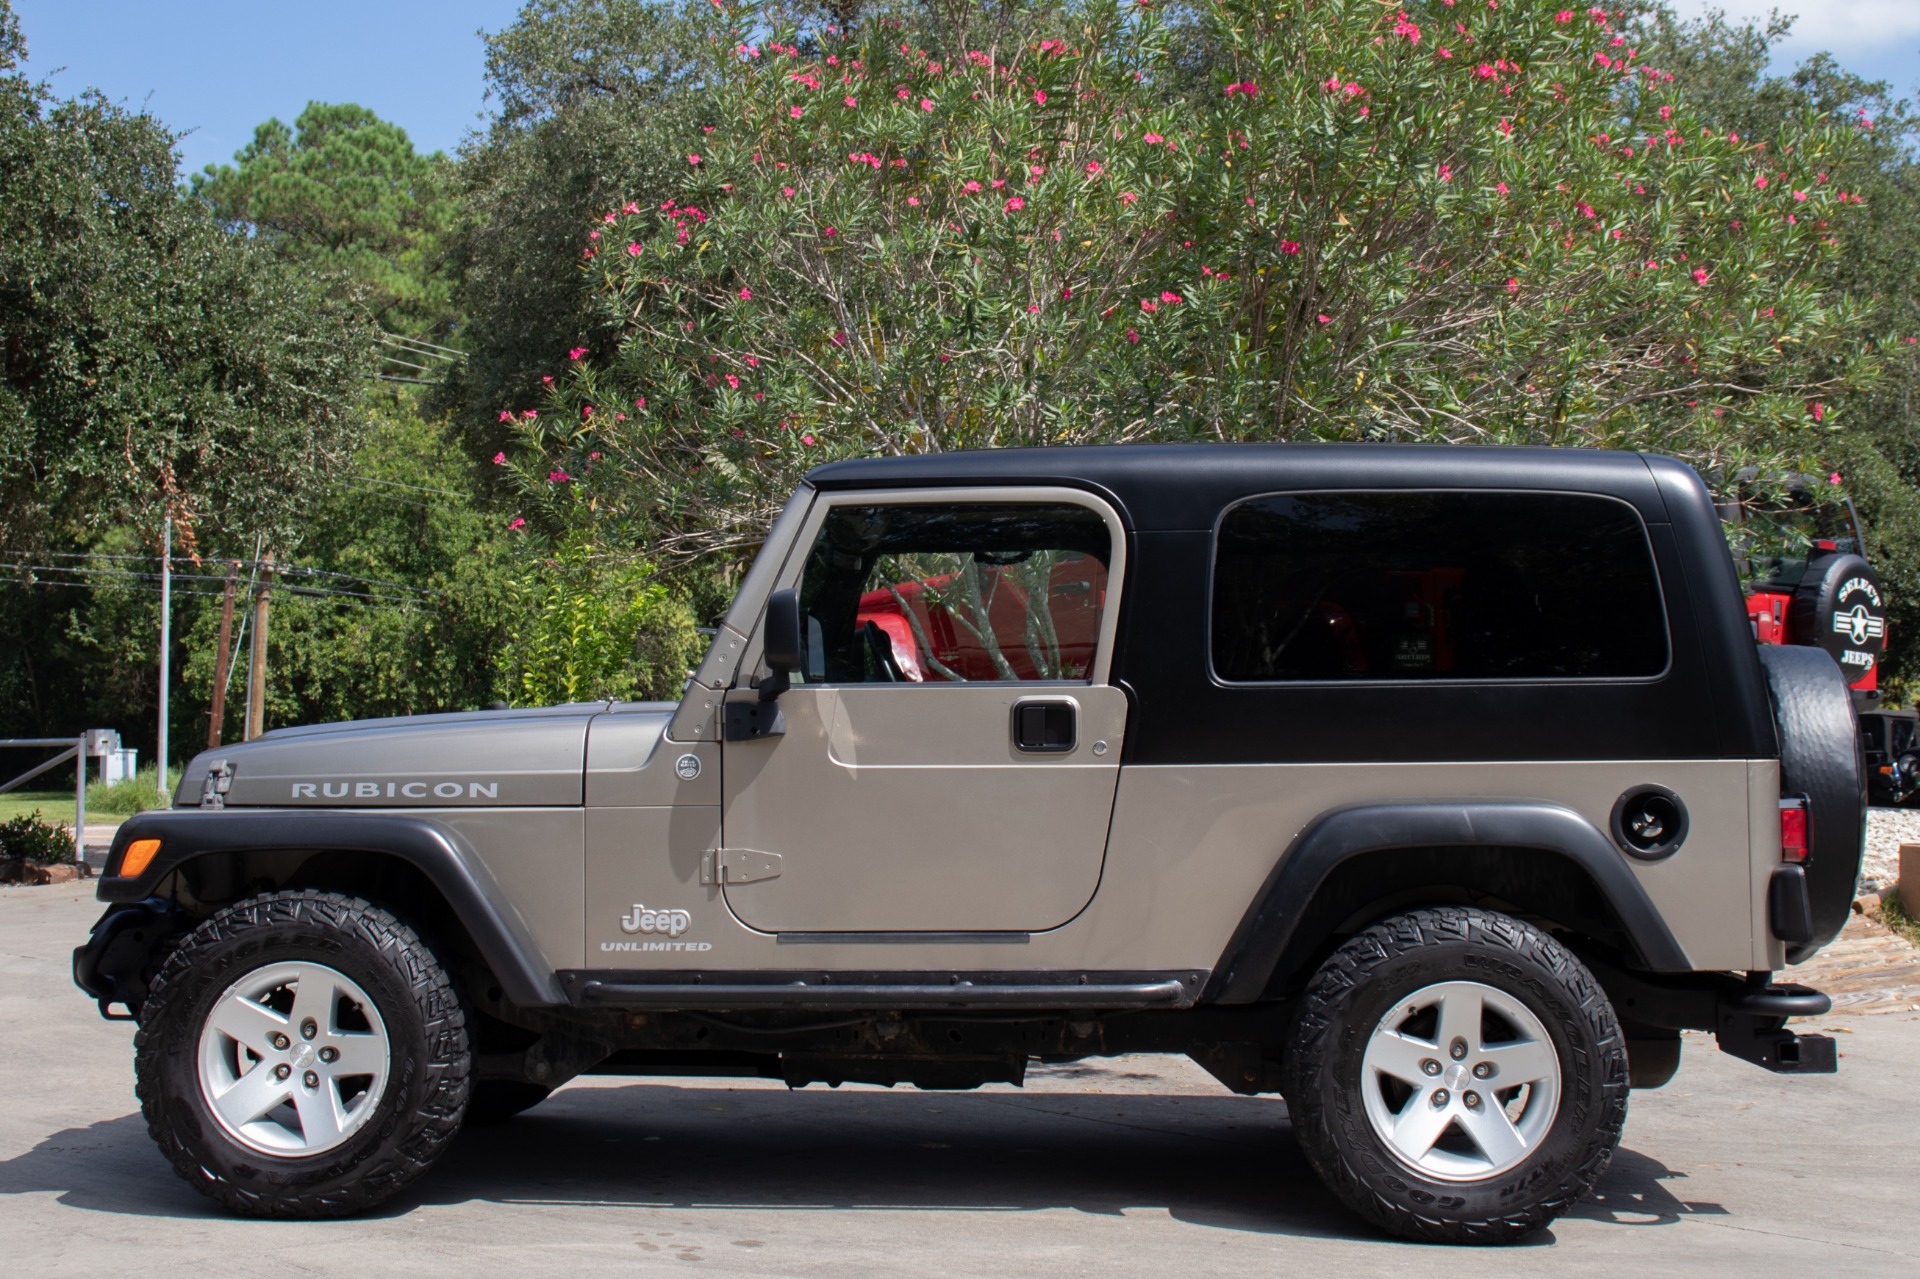 Used 2005 Jeep Wrangler Unlimited Rubicon For Sale ($16,995) | Select Jeeps  Inc. Stock #352695